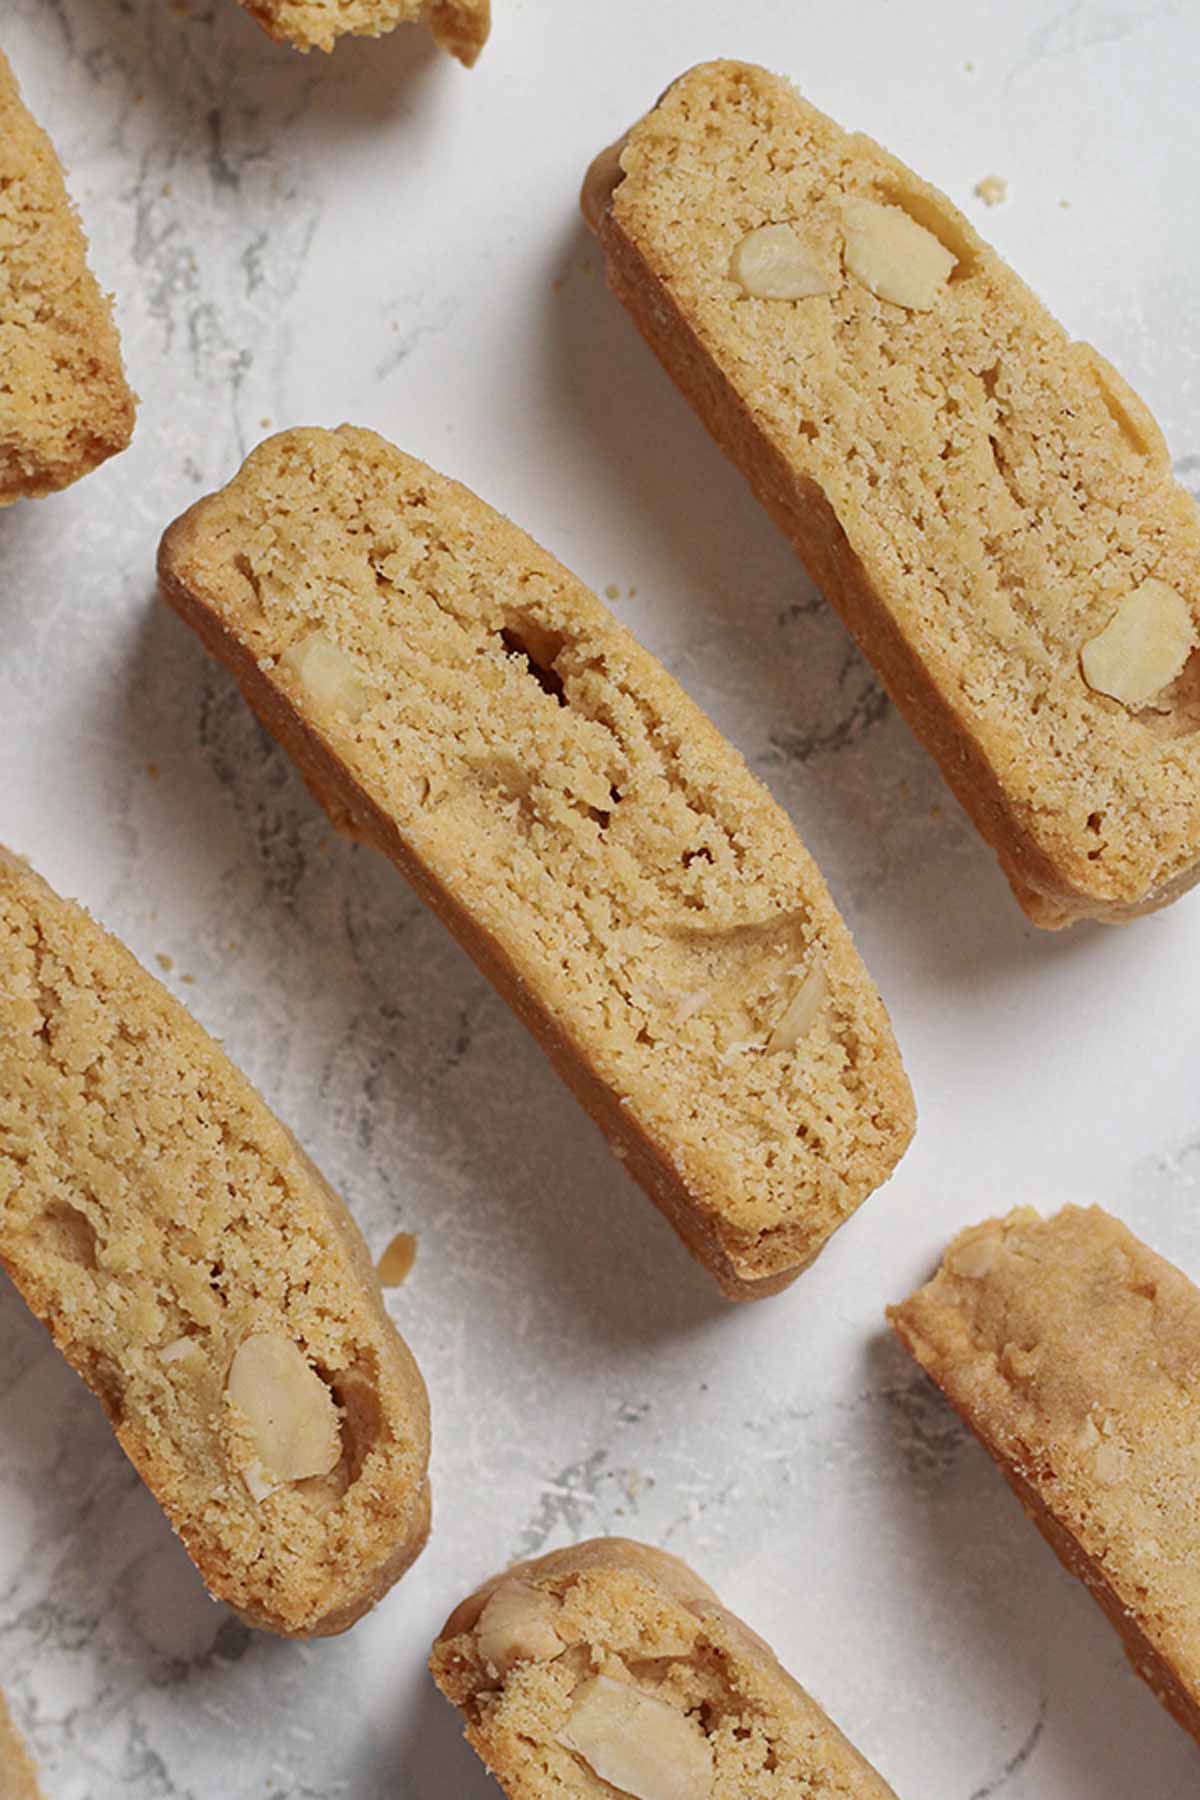 Slices Of Almond Biscotti On A White Surface